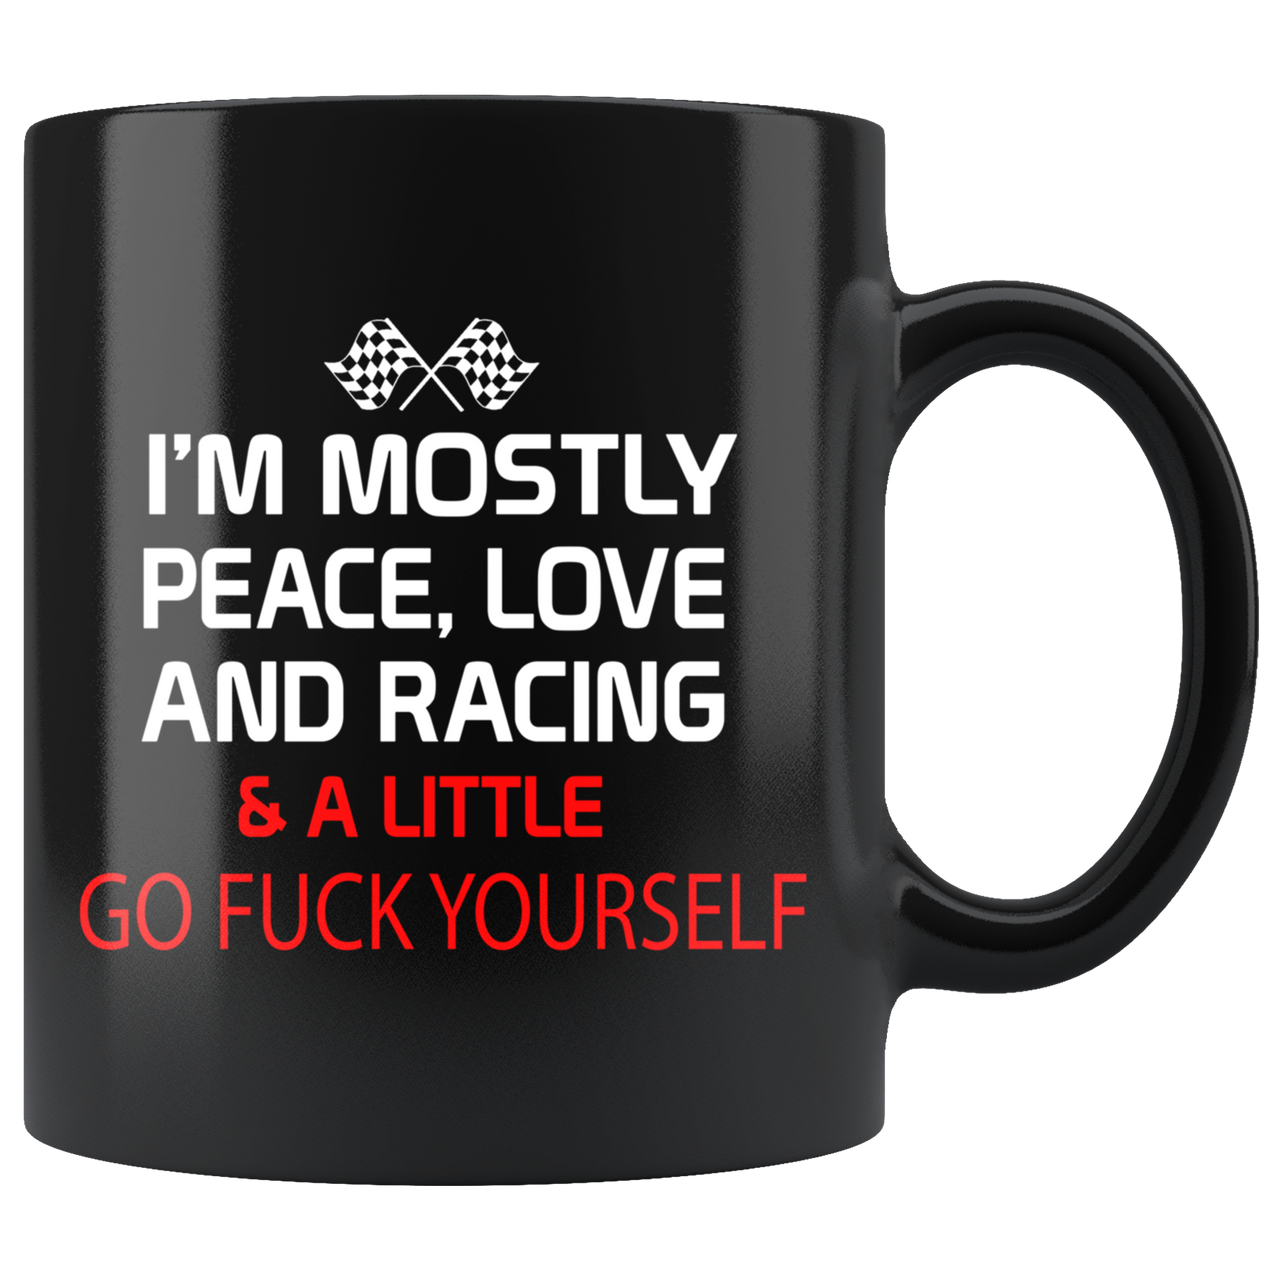 I'm Mostly Peace Love And Racing & A Little G F Yourself Mug!